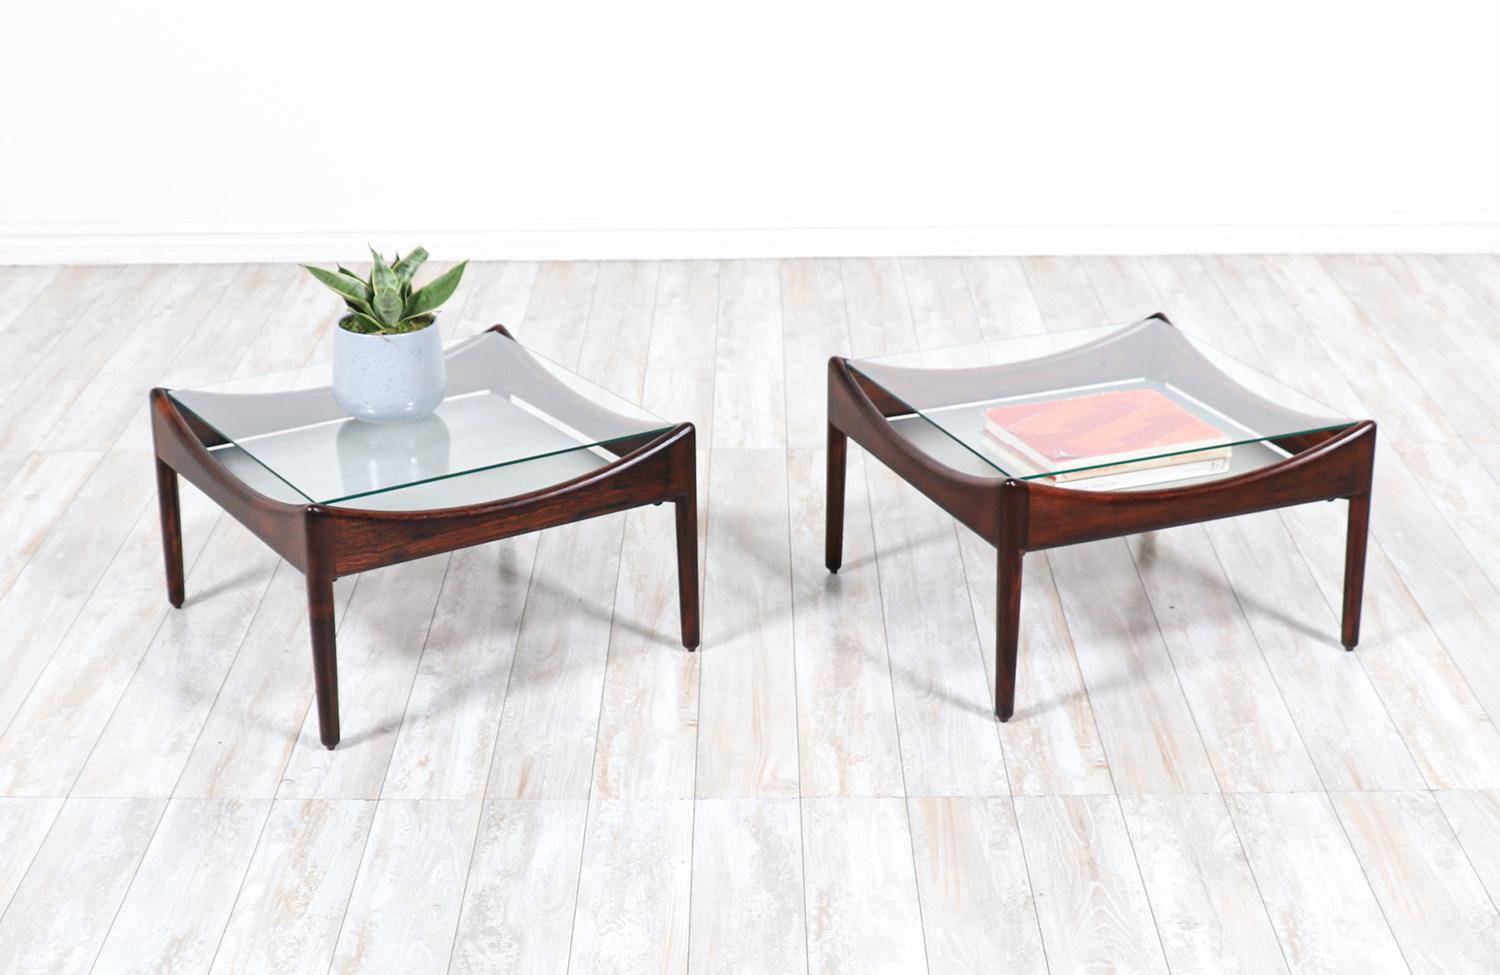 Kristian Vedel rosewood coffee/side tables for Søren Willadsen.

________________________________________

Transforming a piece of Mid-Century Modern furniture is like bringing history back to life, and we take this journey with passion and